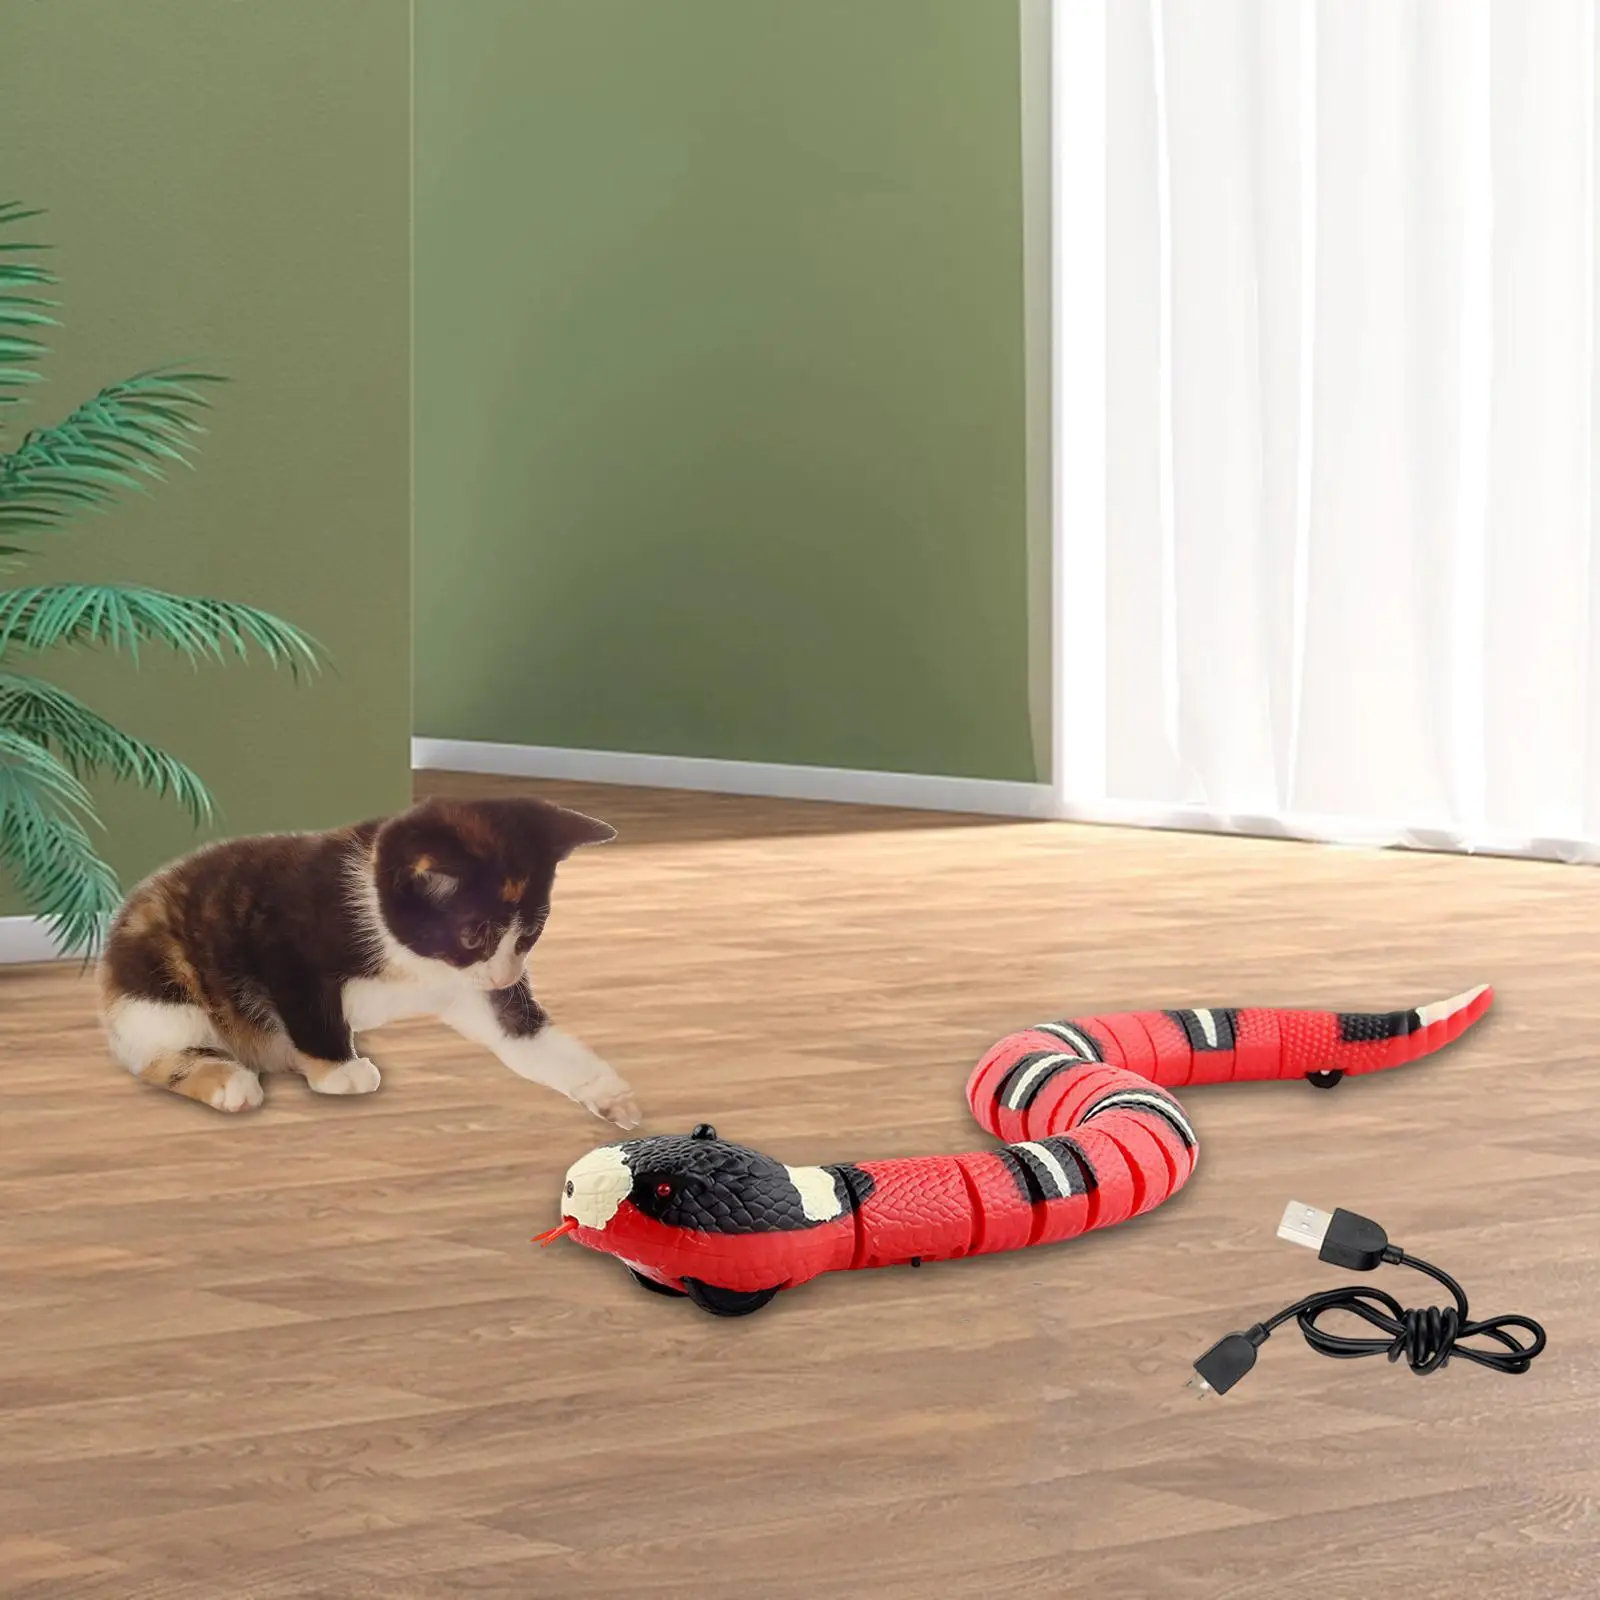 Smart Sensing Snake USB Rechargeable Electric Snake Toy Pet Game for Kids Toys Boys Gift April Fools Practical Jokes